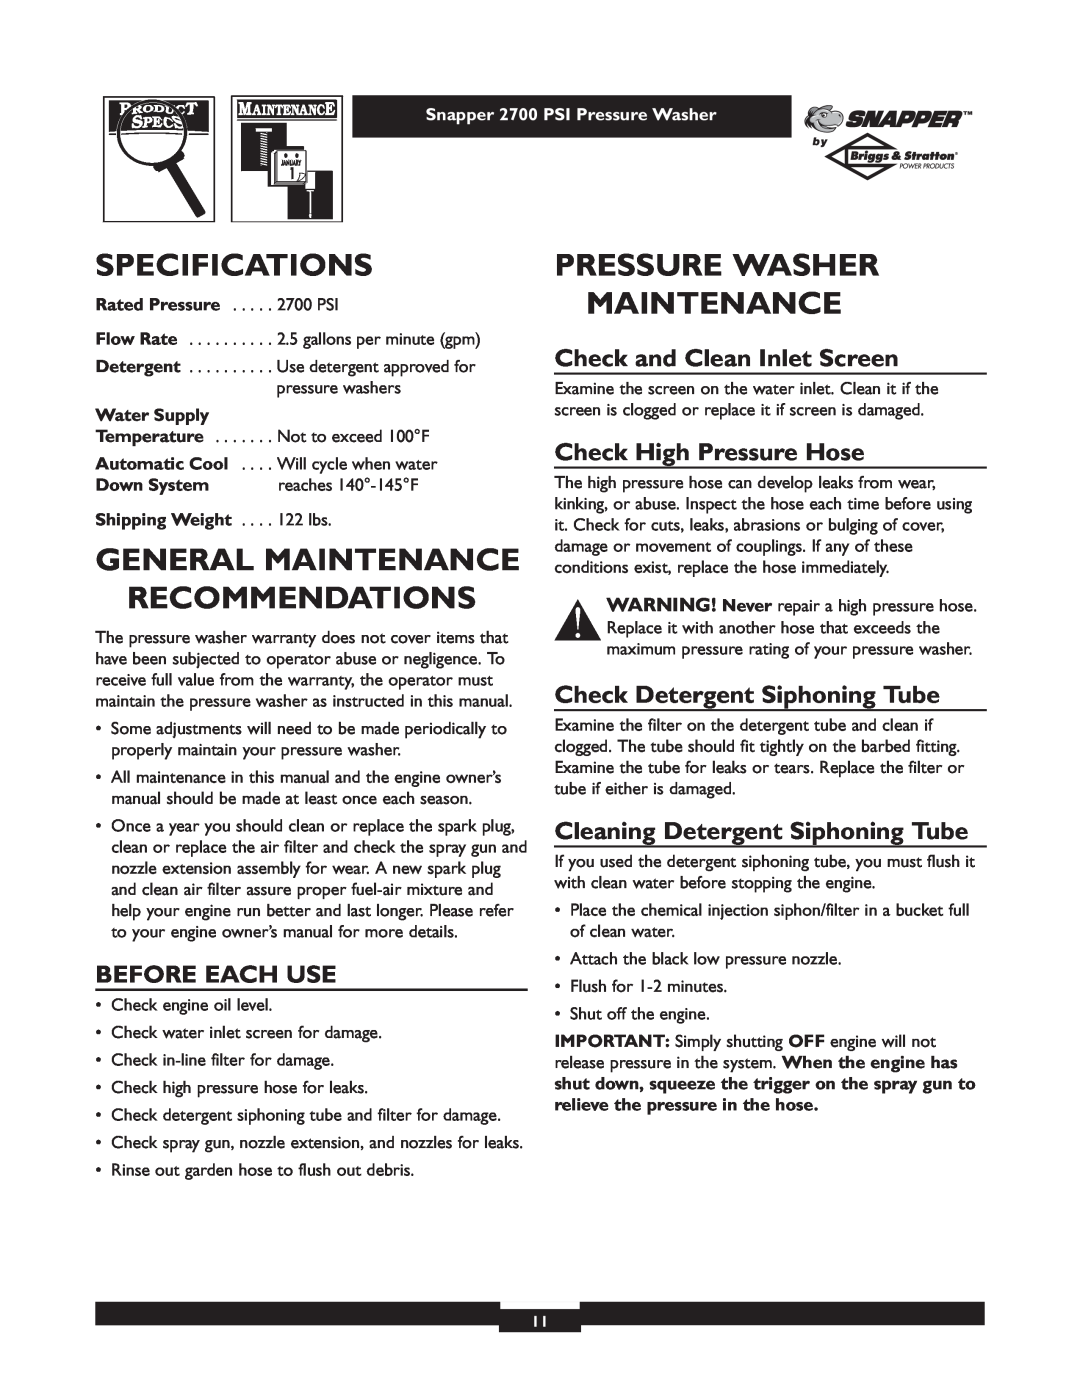 Briggs & Stratton 2700PSI Specifications, General Maintenance Recommendations, Pressure Washer Maintenance, Water Supply 